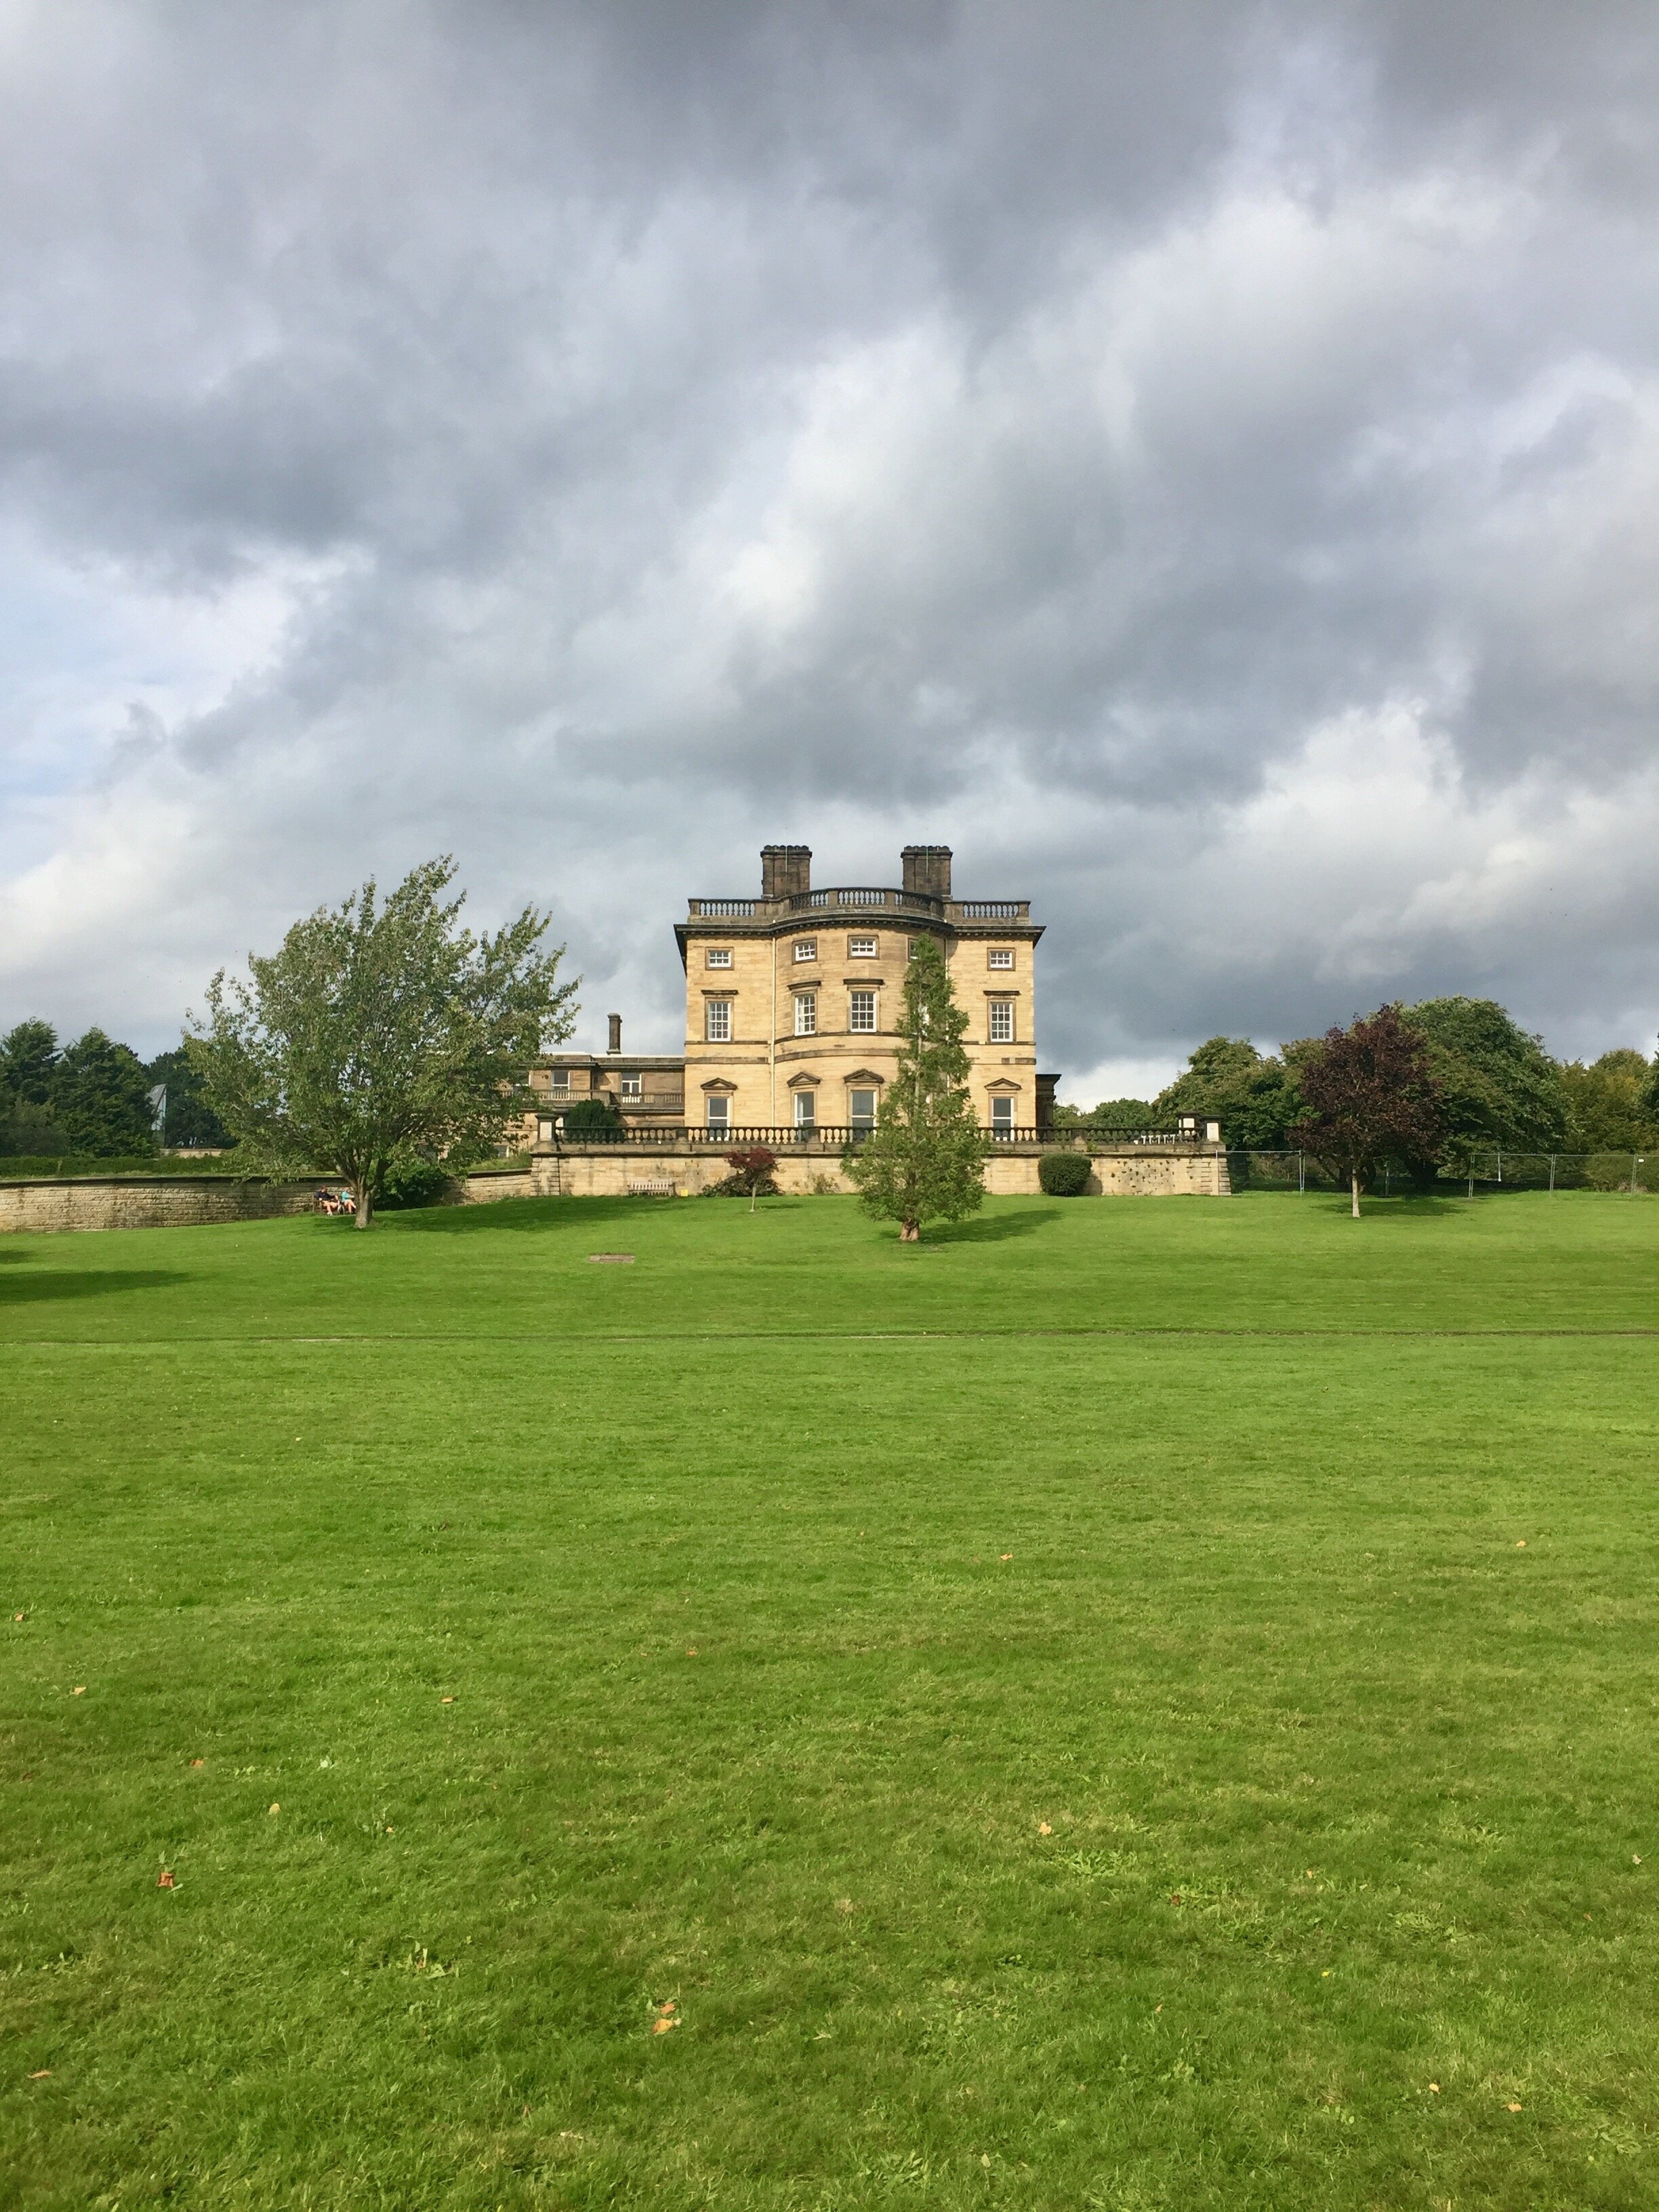  The South face of Bretton Hall, overlooking the estate. 